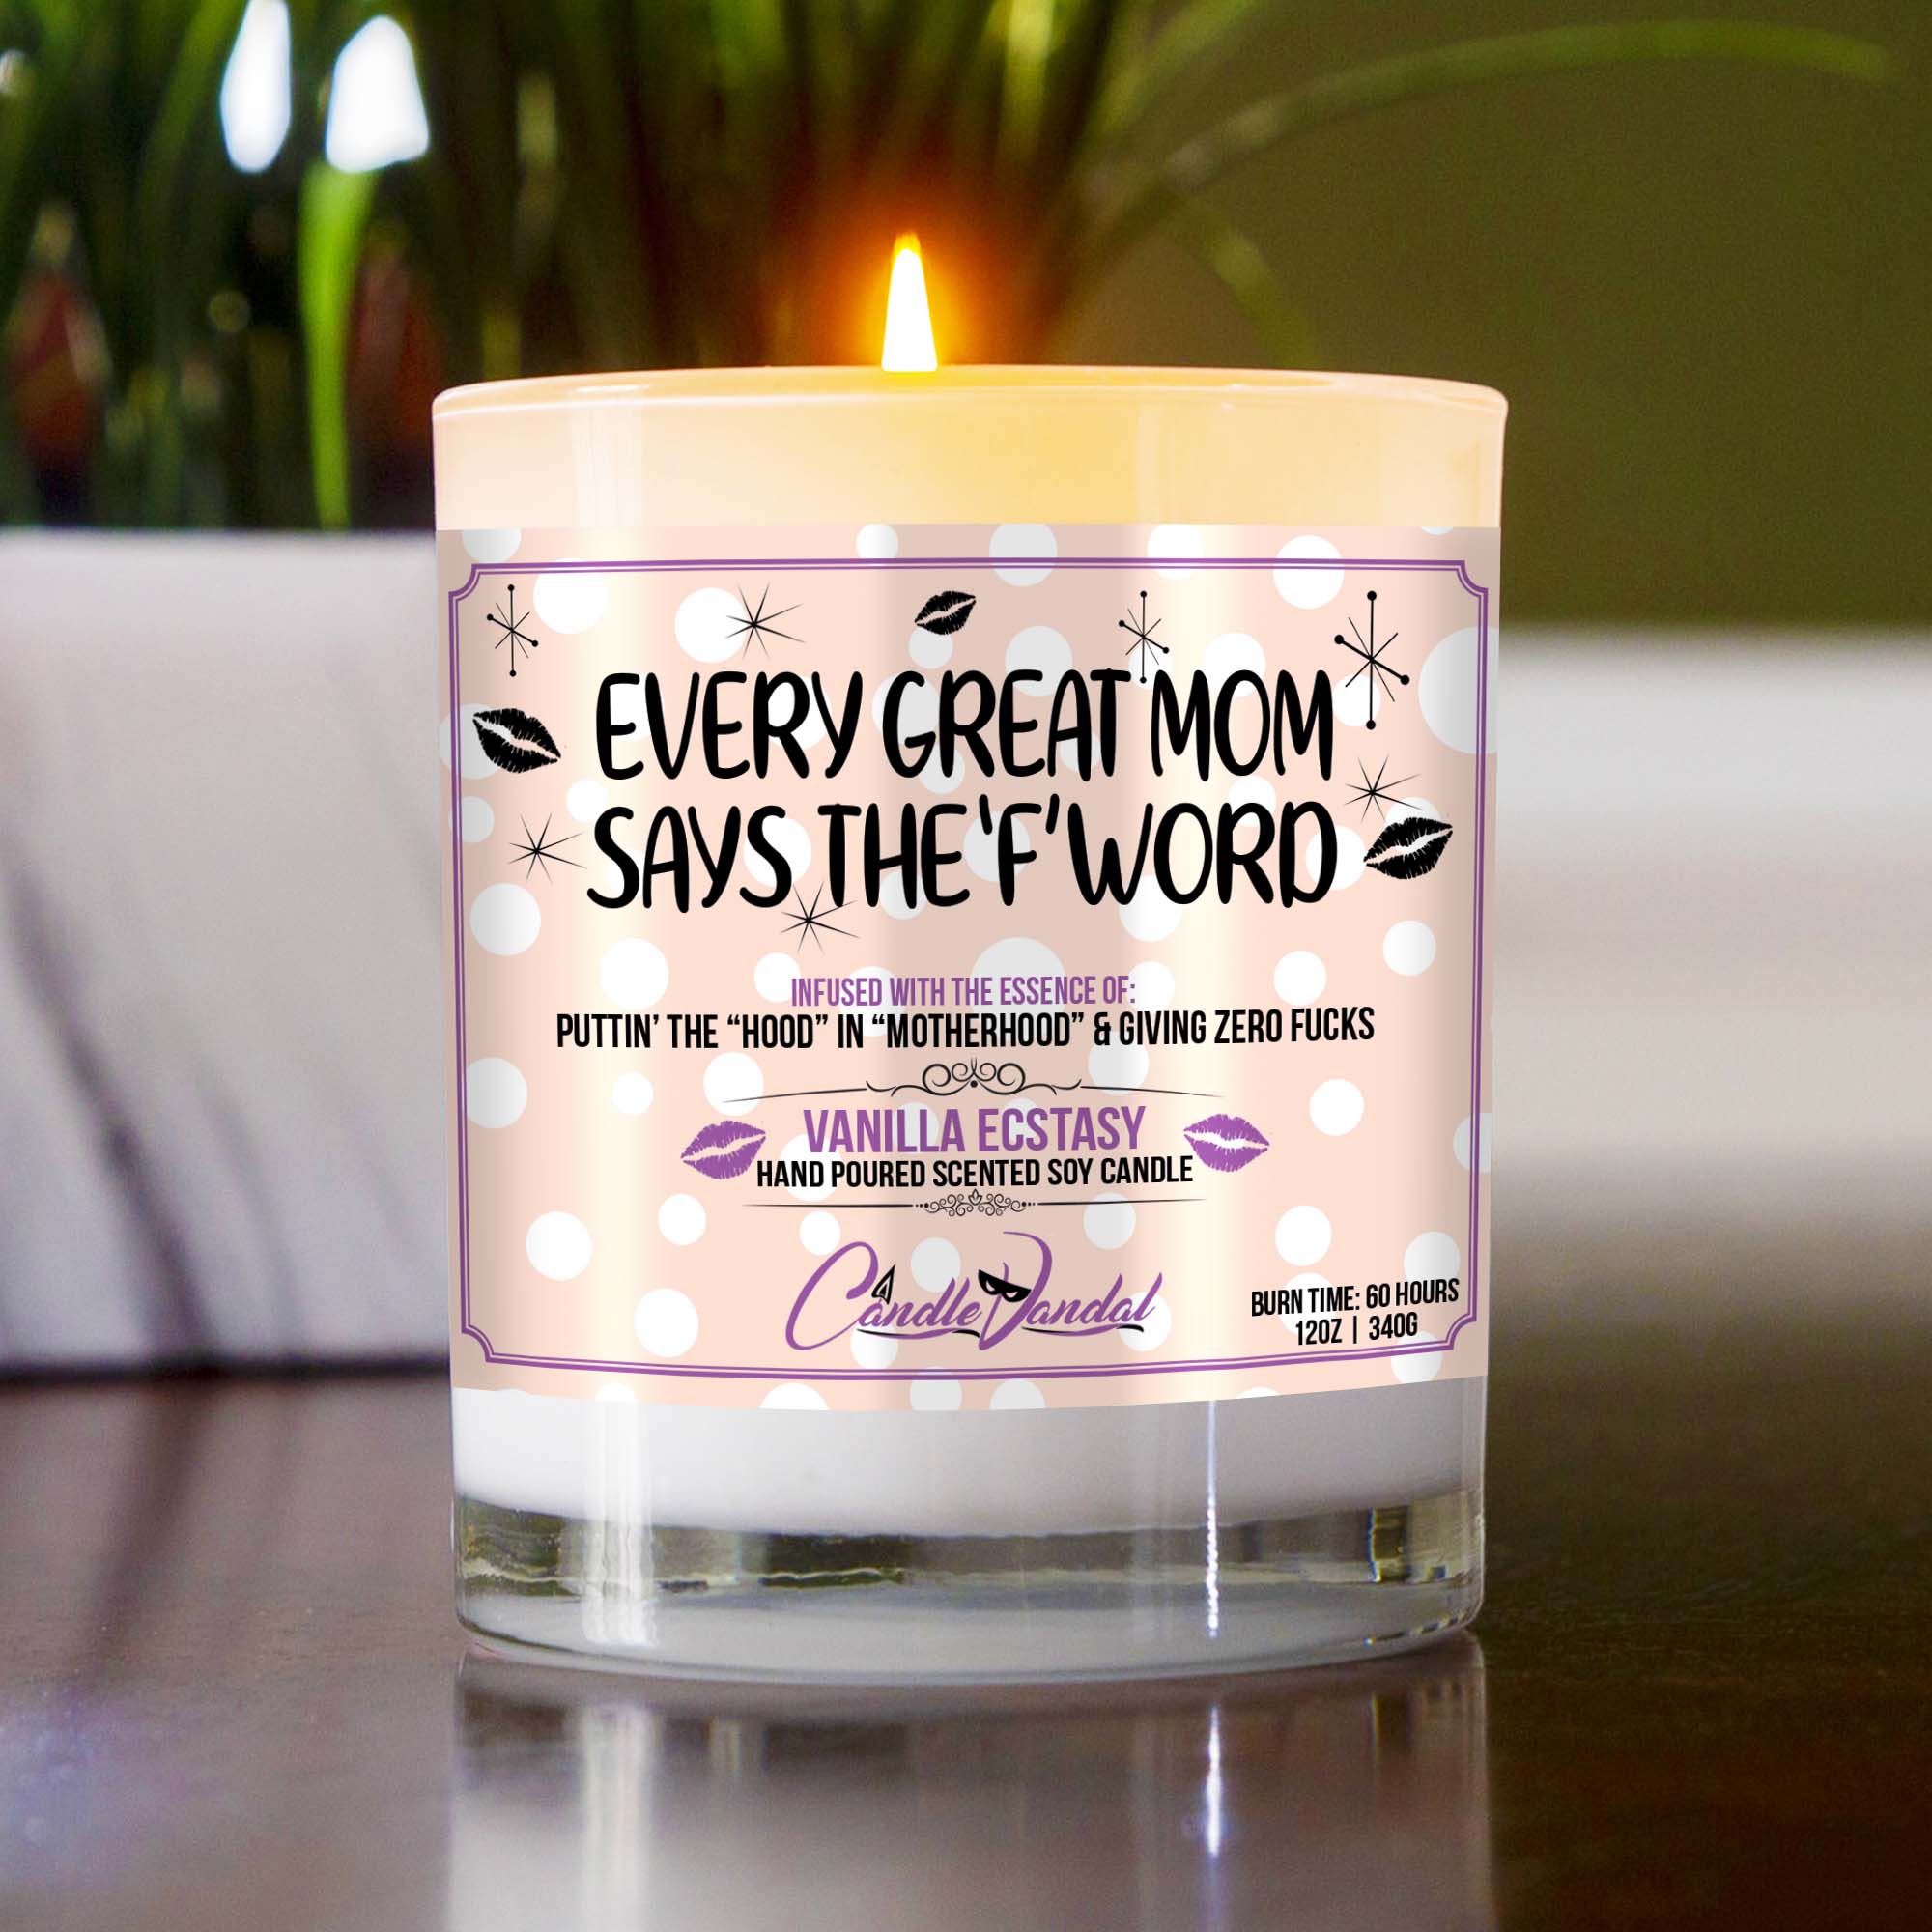 https://candlevandal.com/wp-content/uploads/2020/01/every-great-mom-says-the-f-word-table-candle.jpg